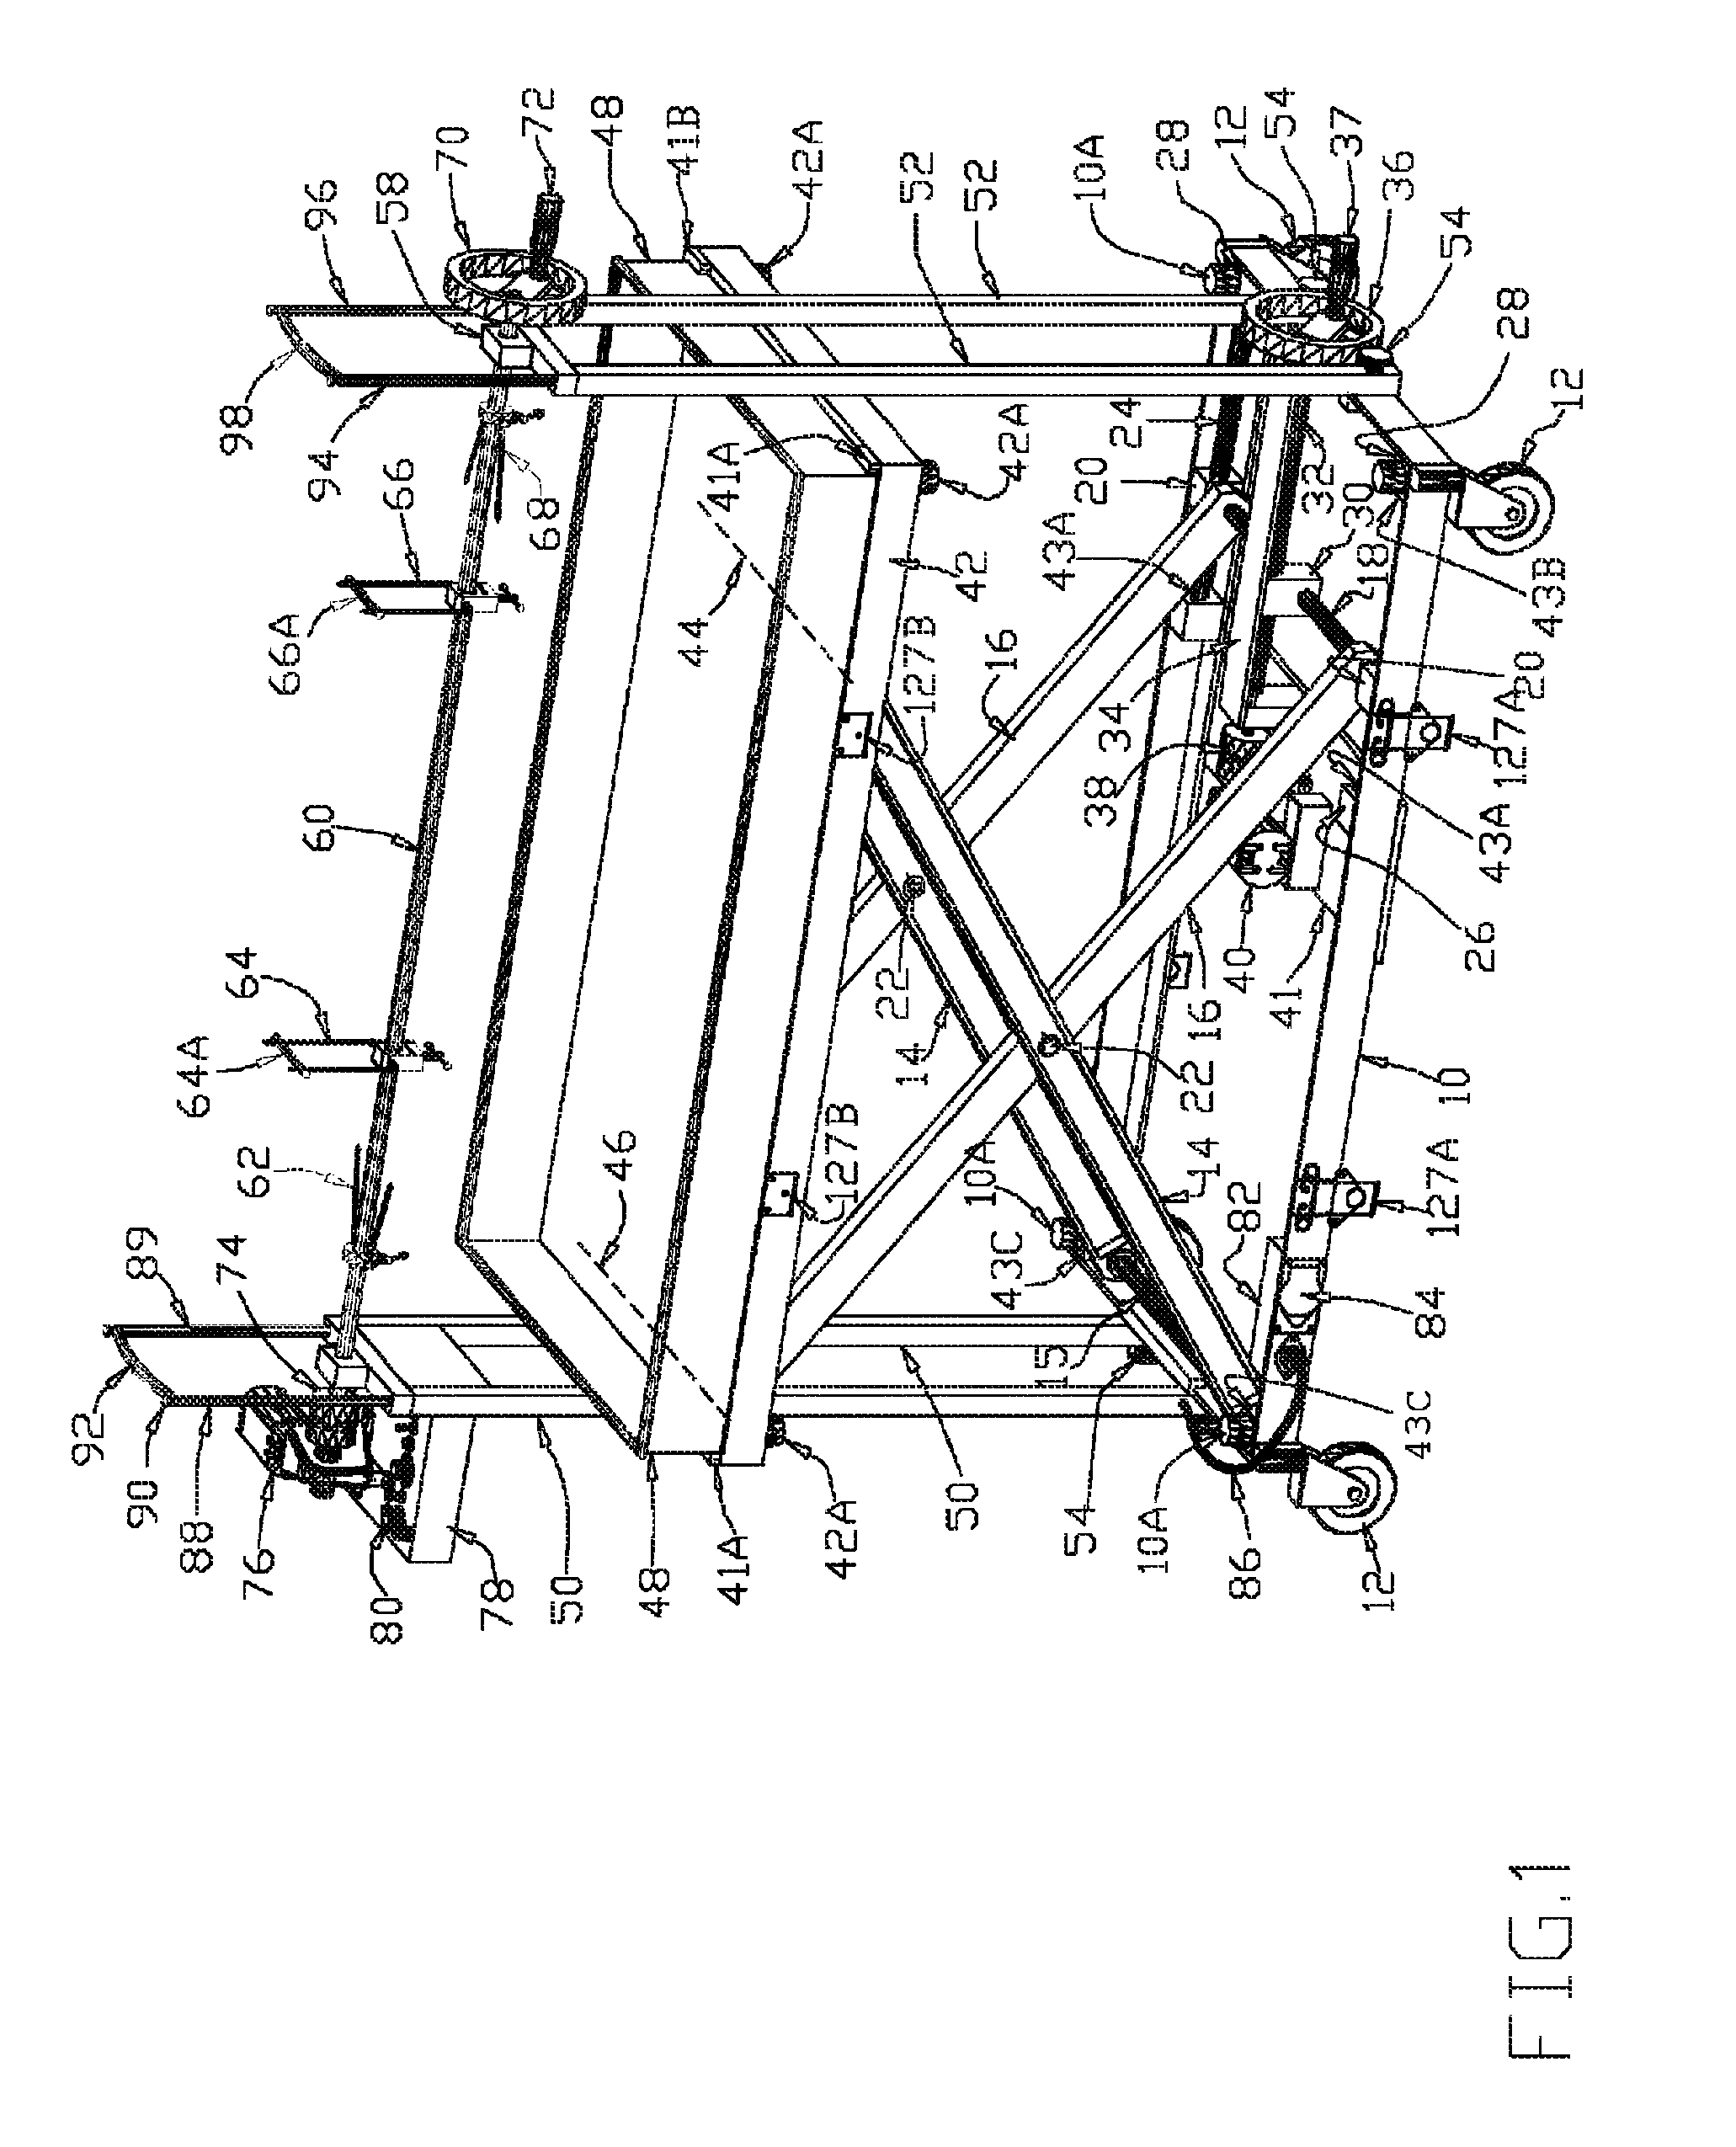 Collapsible barbeque with variable firebed position and method of use